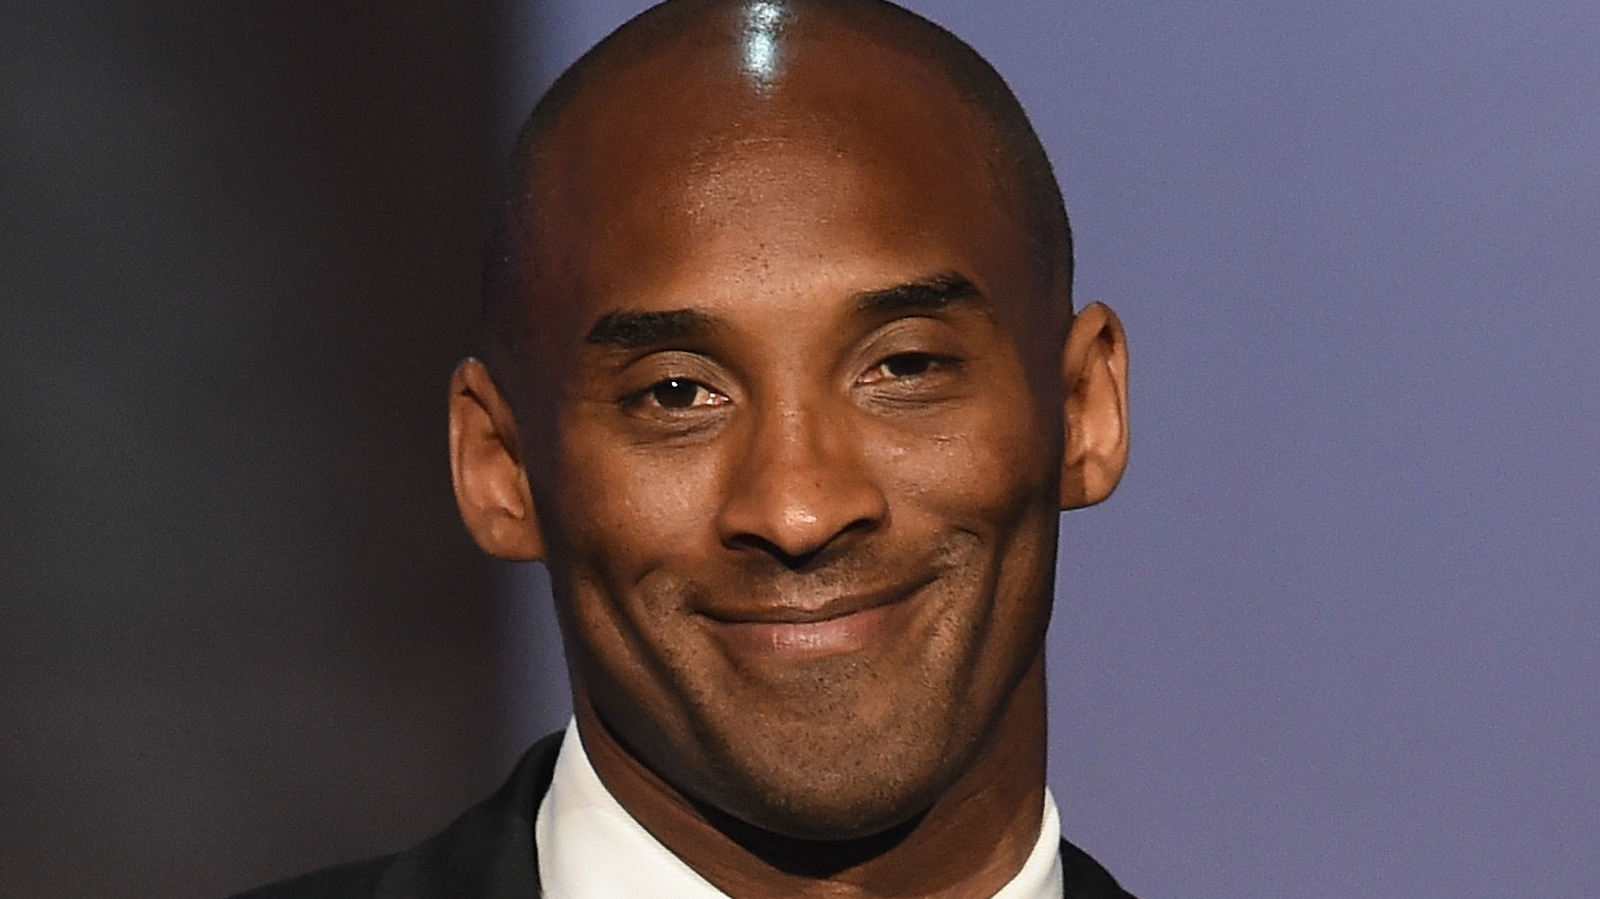 Kobe Bryant Predicted His Teammate And Friend’s Well-Deserved Honor – Grunge